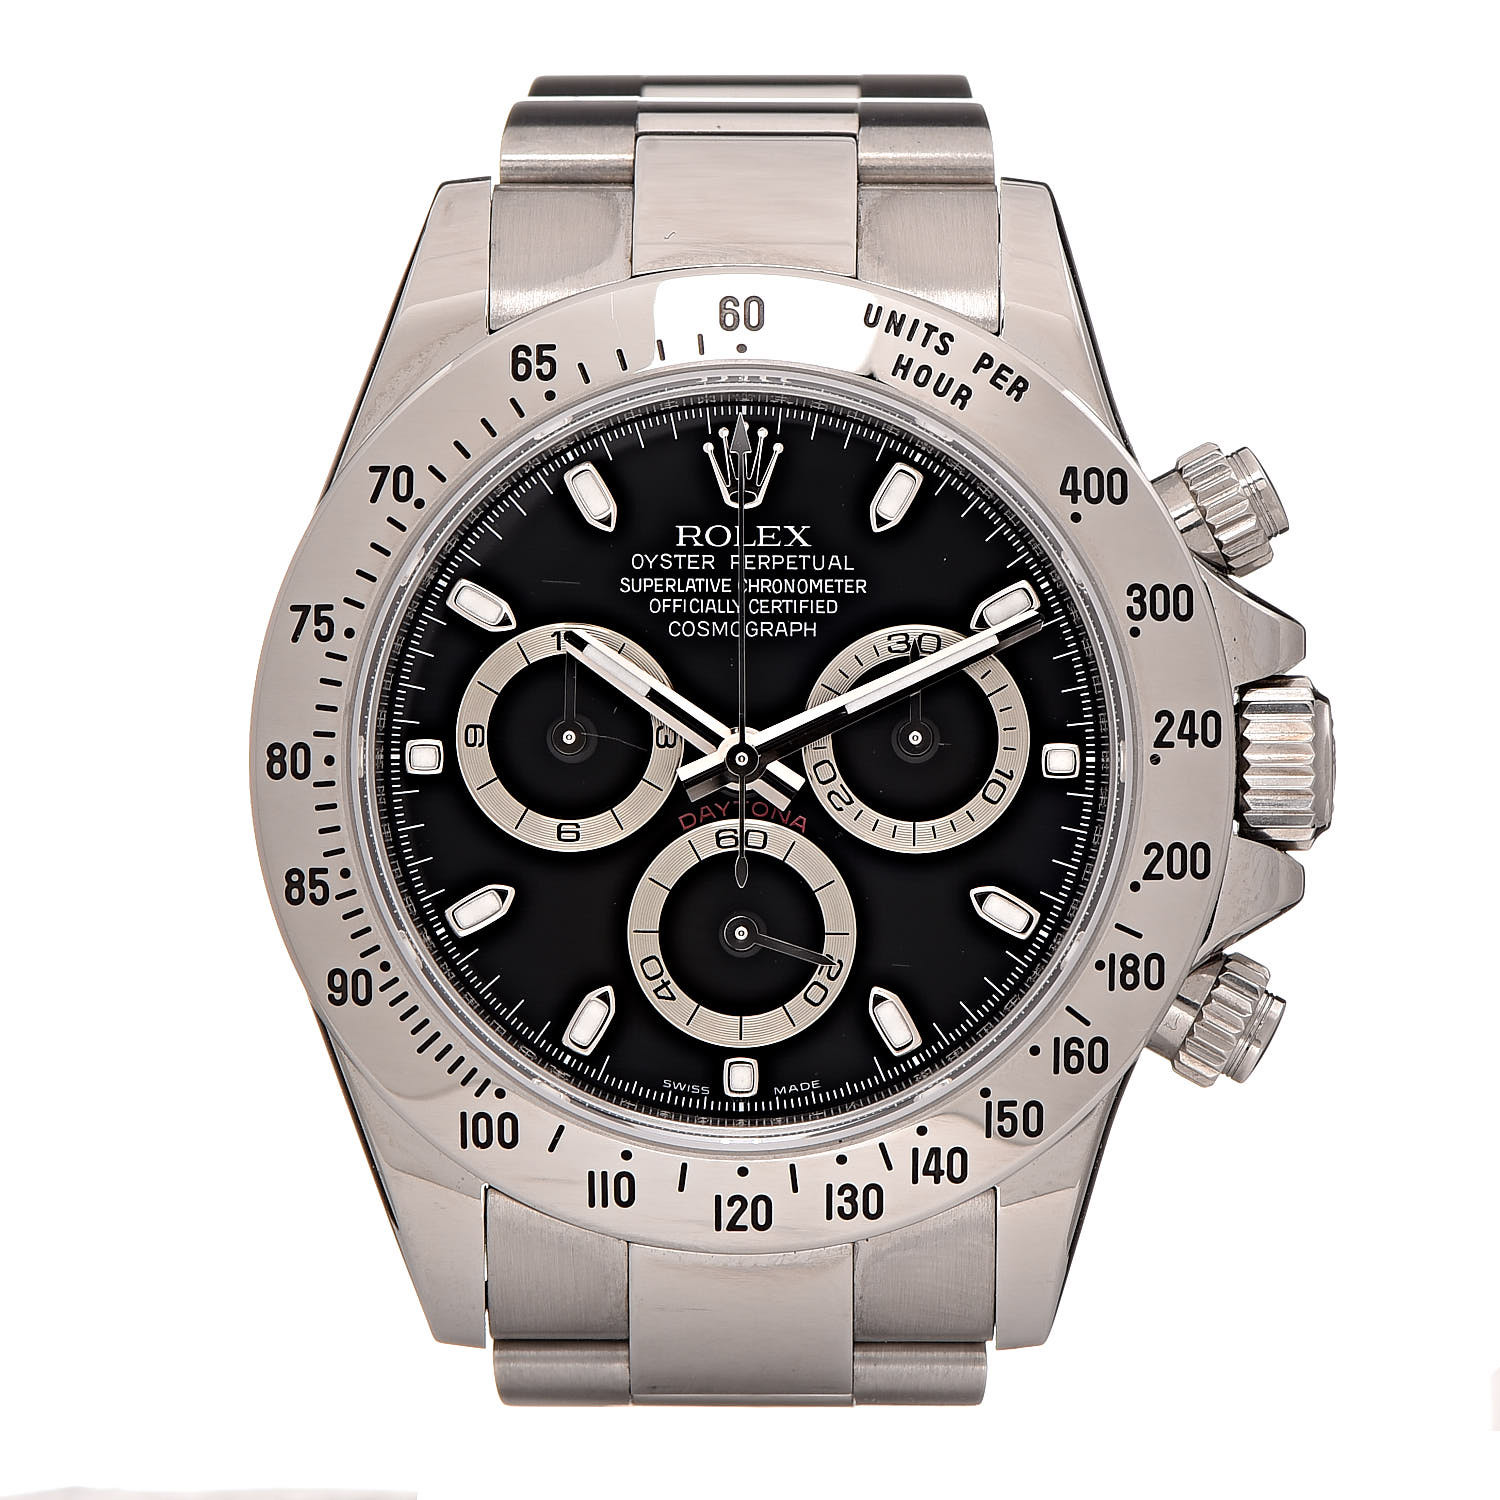 ROLEX Stainless Steel 40mm Oyster Perpetual Daytona Cosmograph Watch ...